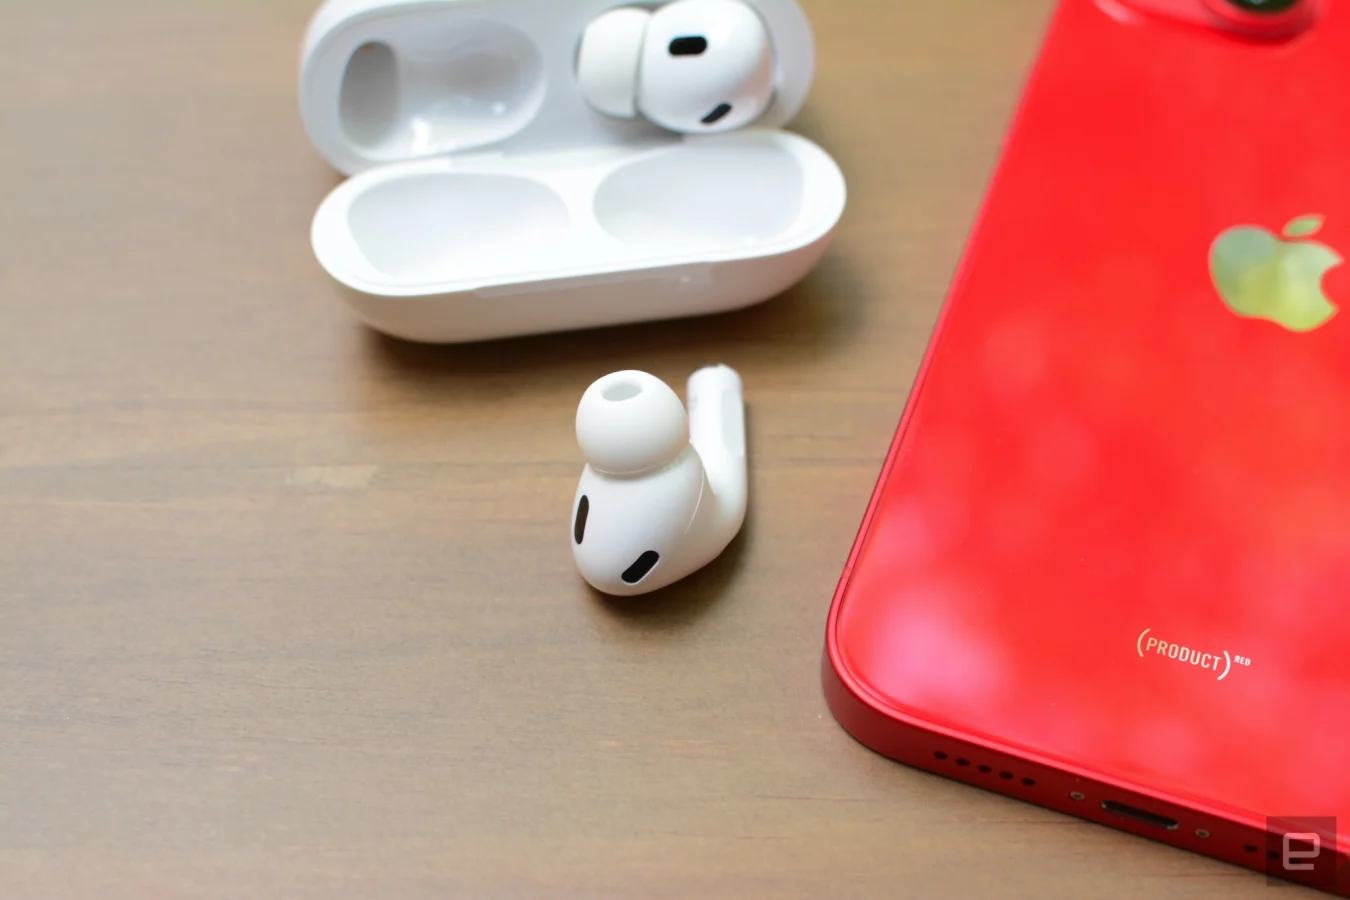 Despite the unchanged design, Apple has packed an assortment of updates into the new AirPods Pro.  All of the conveniences from the 2019 model are here as well, alongside additions like Adaptive Transparency, Personalized Spatial Audio and a new touch gesture in tow.  There's room to further refine the familiar formula, but Apple has given iPhone owners several reasons to upgrade.